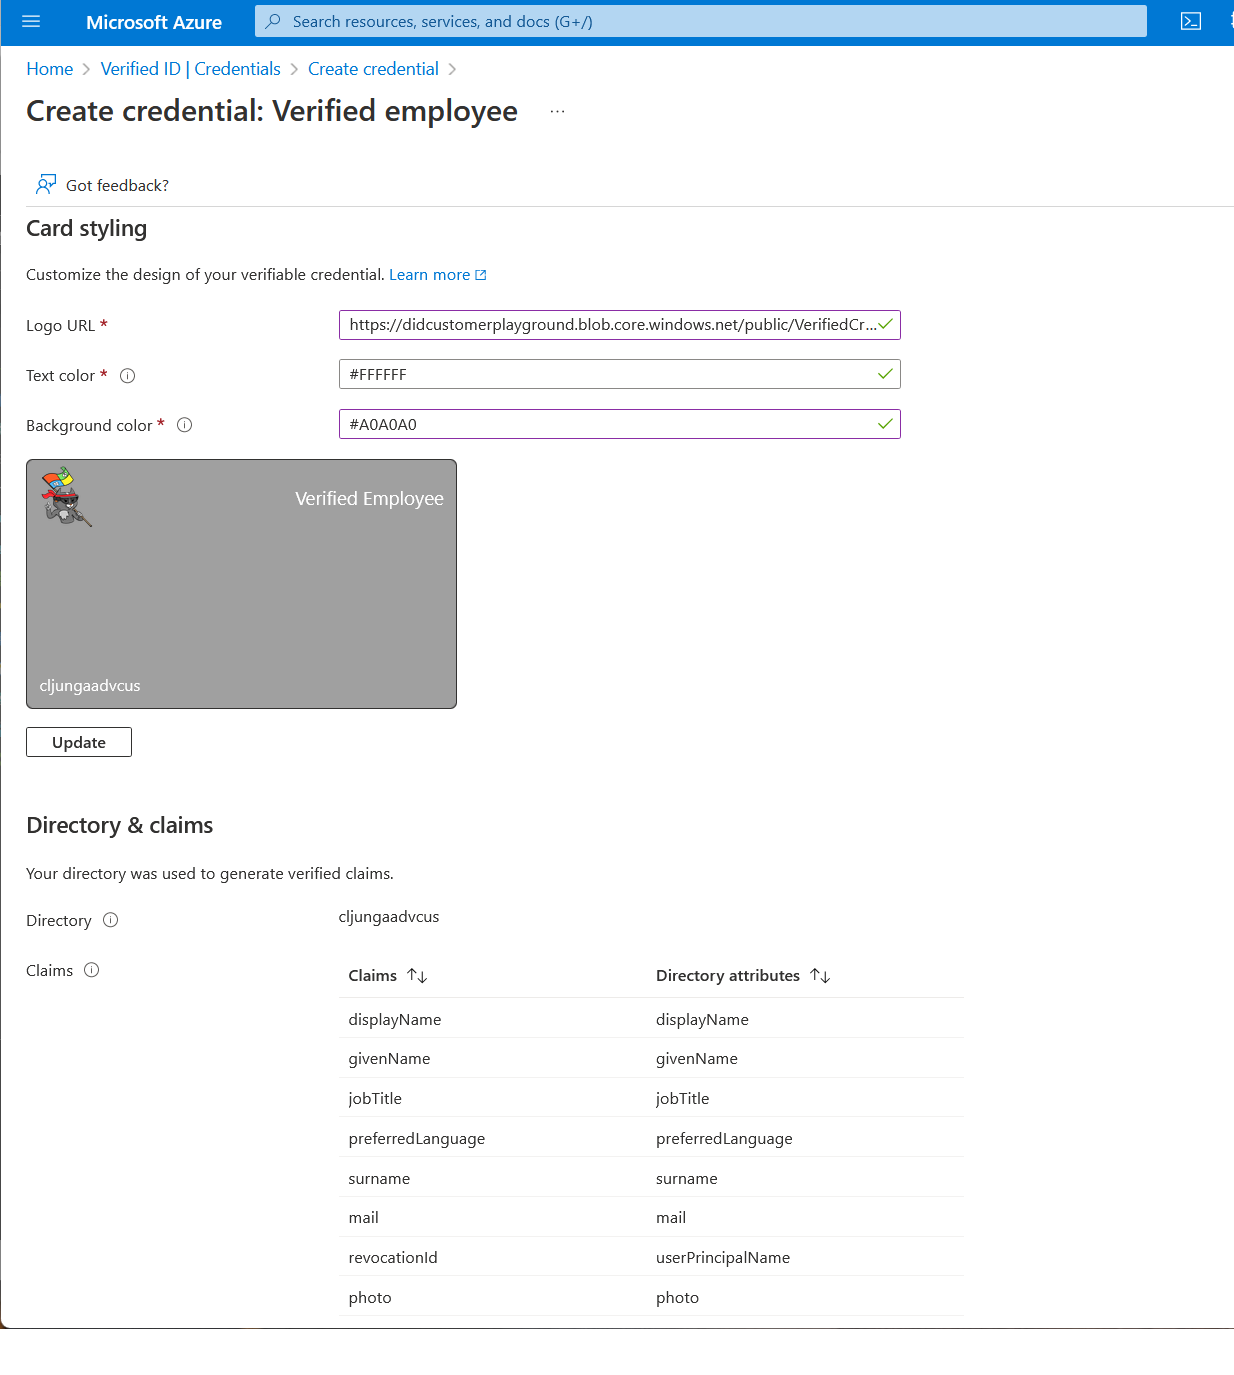 Screenshot of the create credential, verified employee, card styling section.